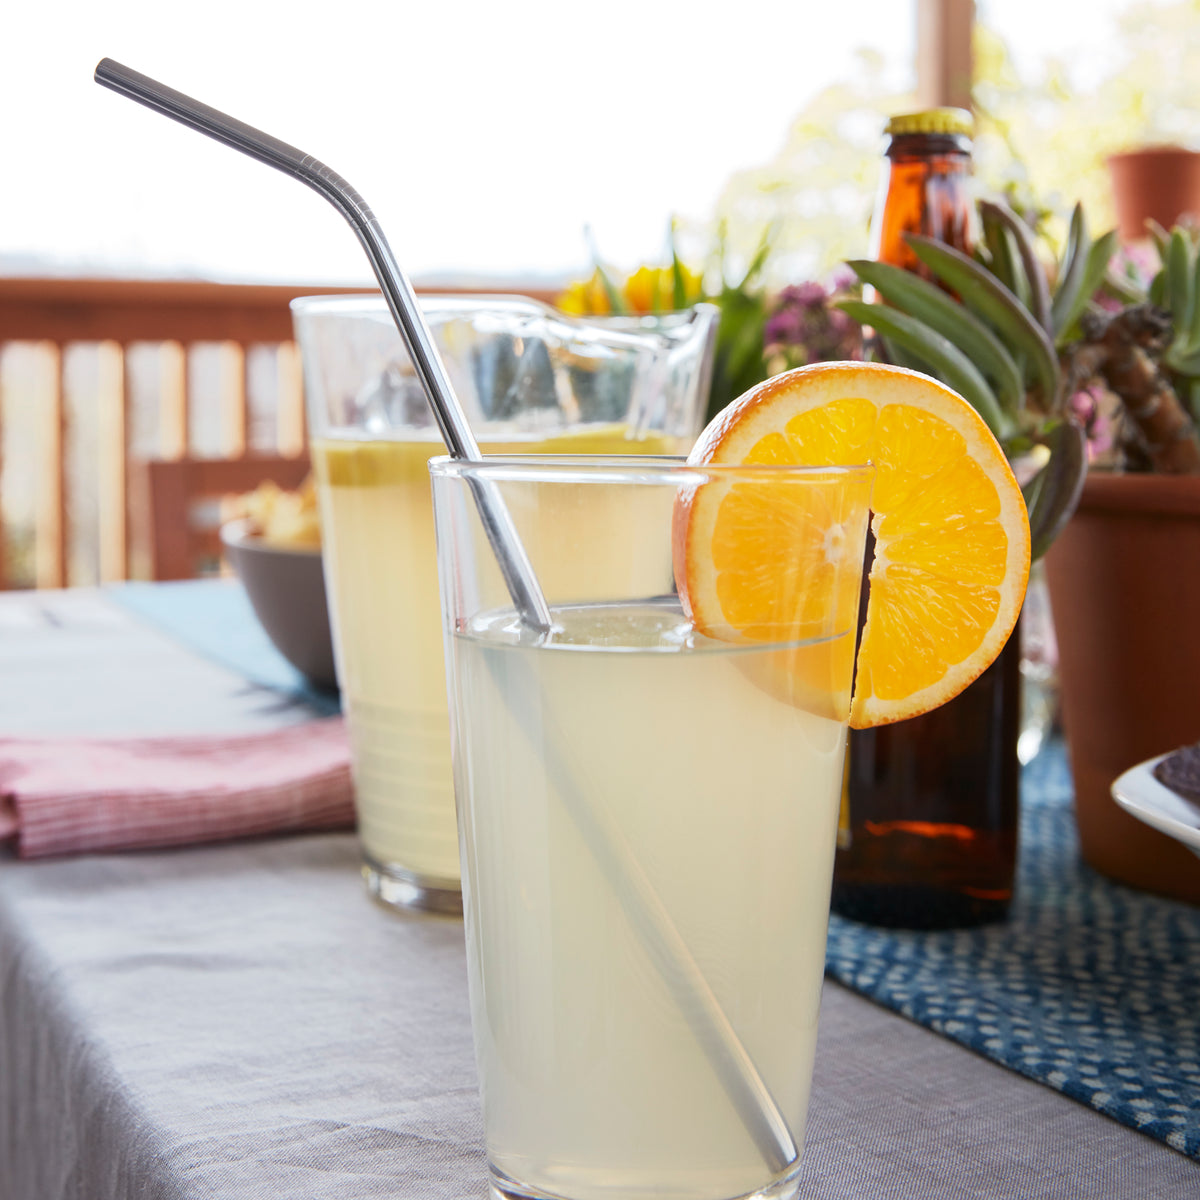 Lifestyle photo, a summertime lemonade in a tall glass tumbler with a fresh orange slice using a brandless stainless steel straw sits on an outdoor patio table.